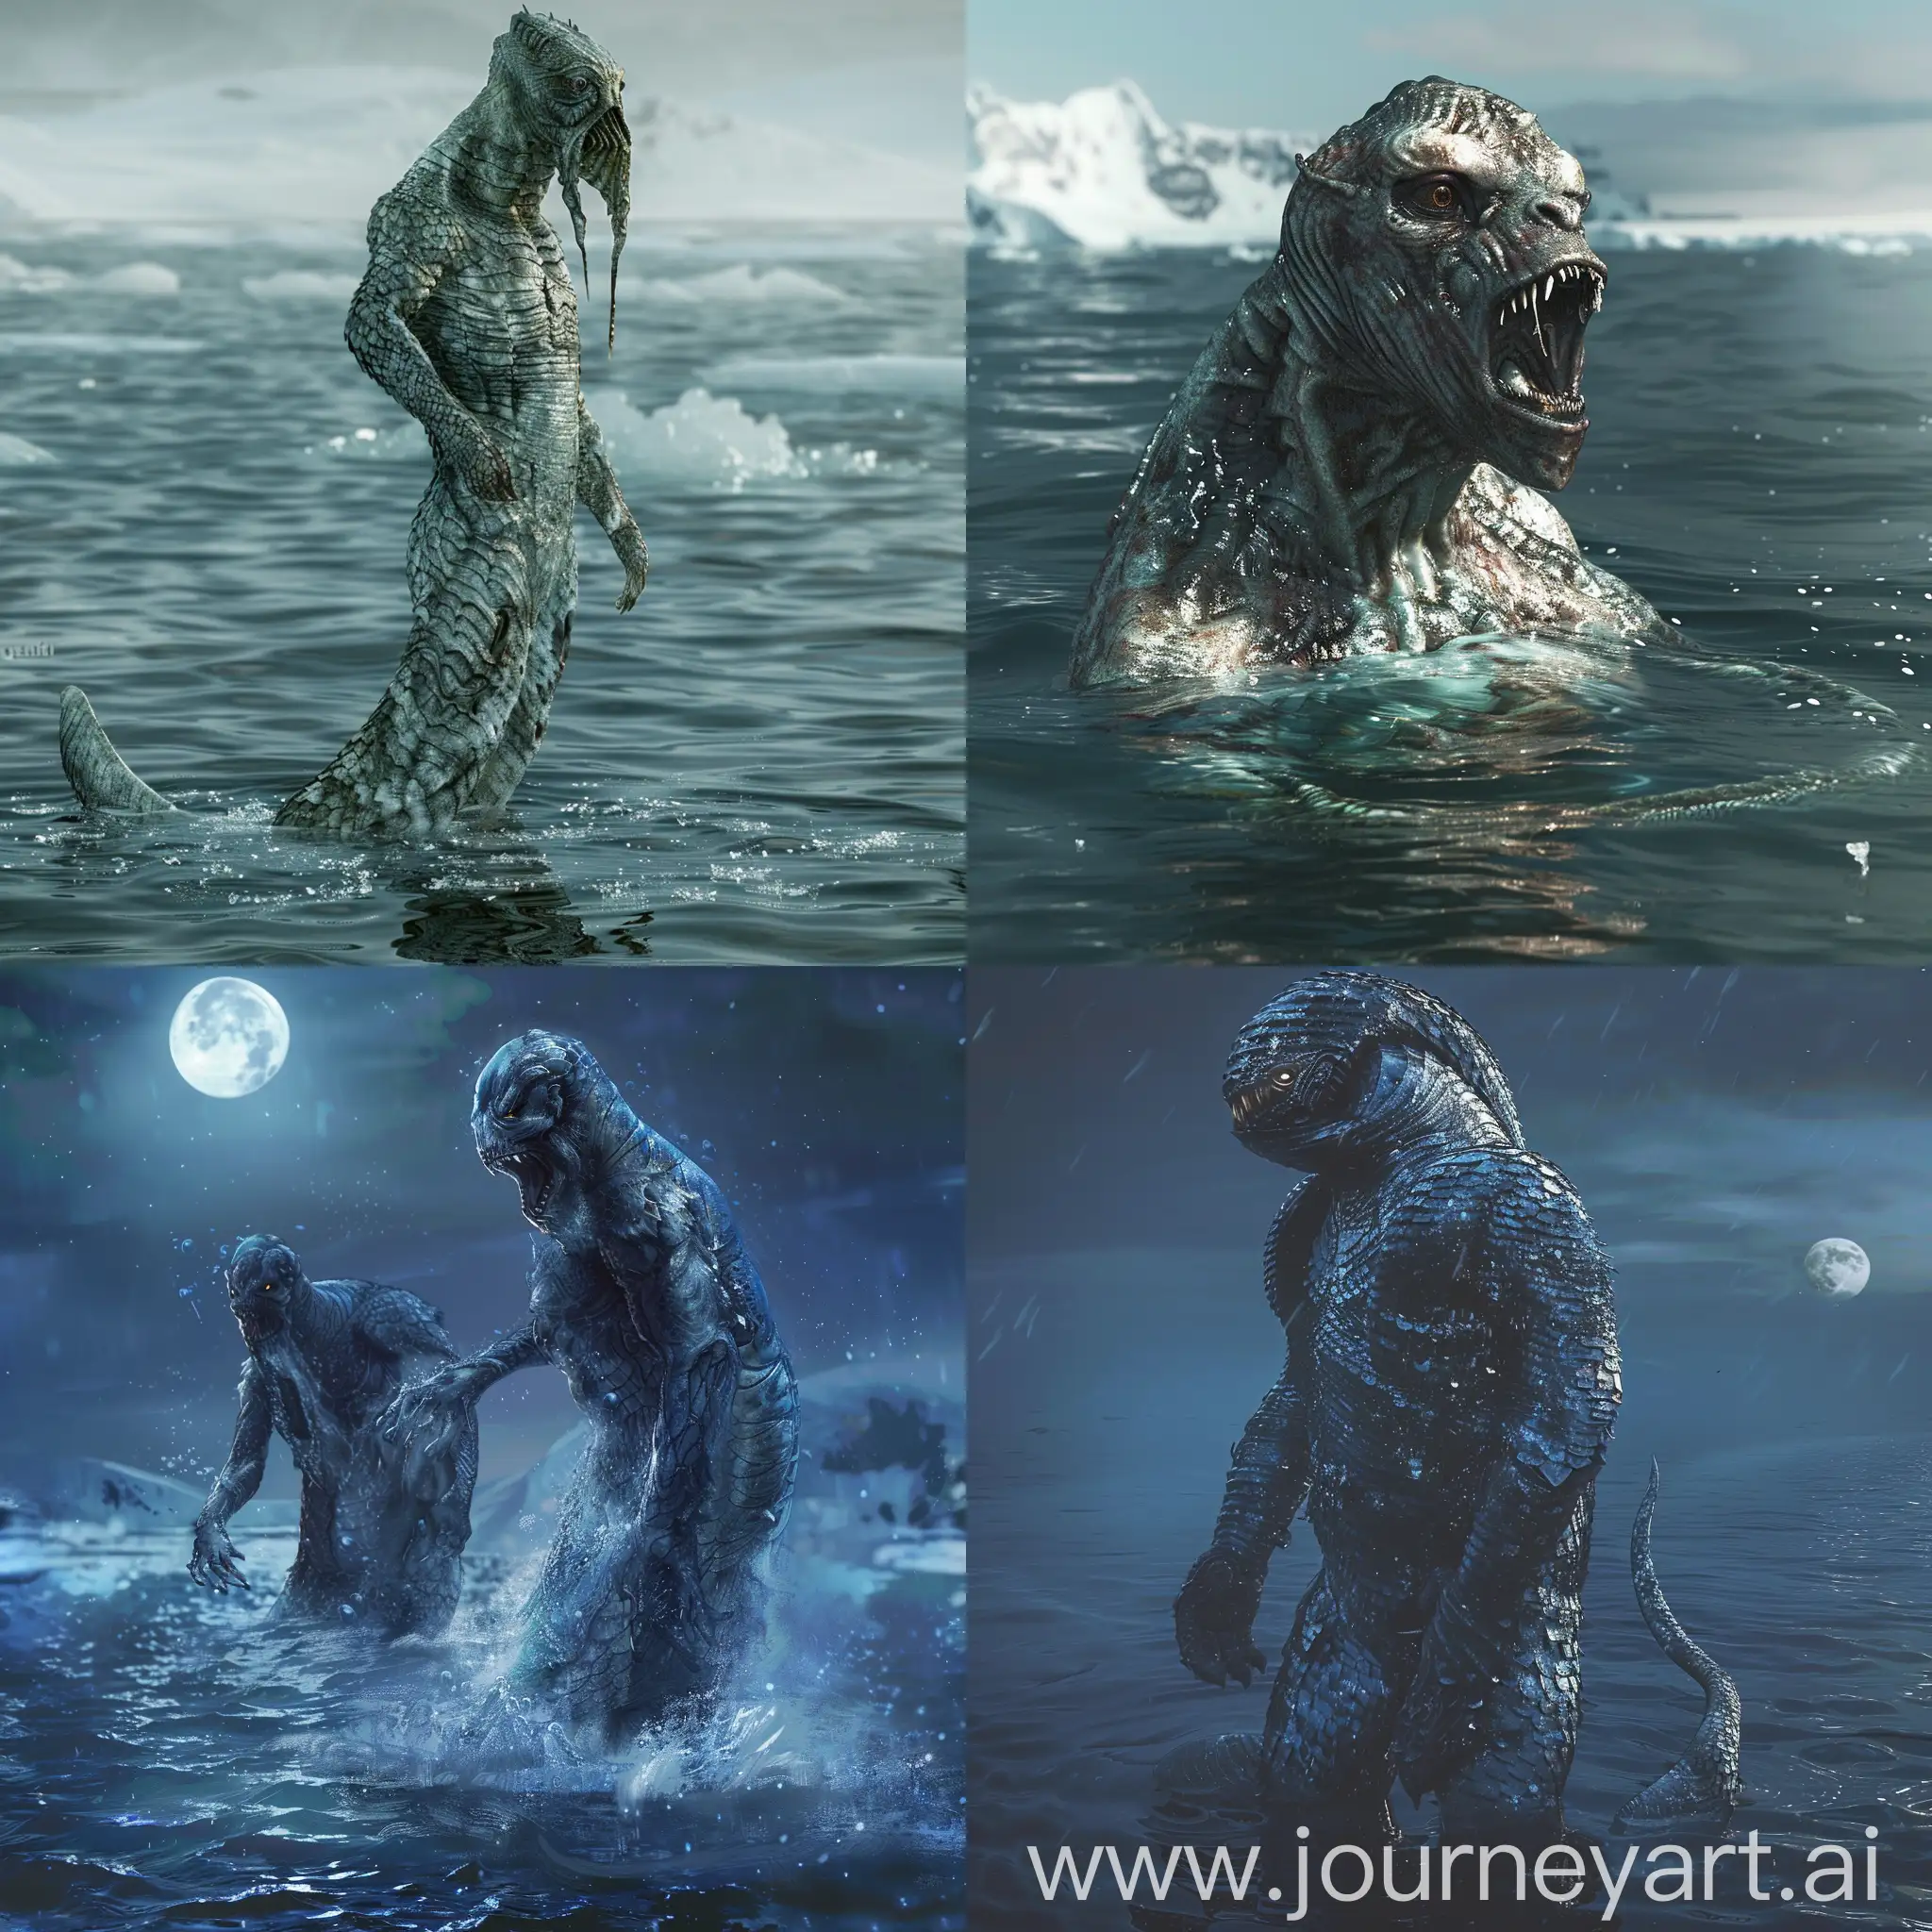 a mythical sea creature known as the Qallupilluit. These beings dwell in the frigid waters of the Arctic, near places like Baffin Island and Nunavut. They are humanoid in appearance but possess twisted, monstrous features, with scales that shimmer like moonlight on the water. Their haunting calls echo across the icy sea, drawing unsuspecting travelers towards their doom. The Qallupilluit are ancient guardians of the ocean depths, sparing no mercy for those who dare to intrude upon their domain.